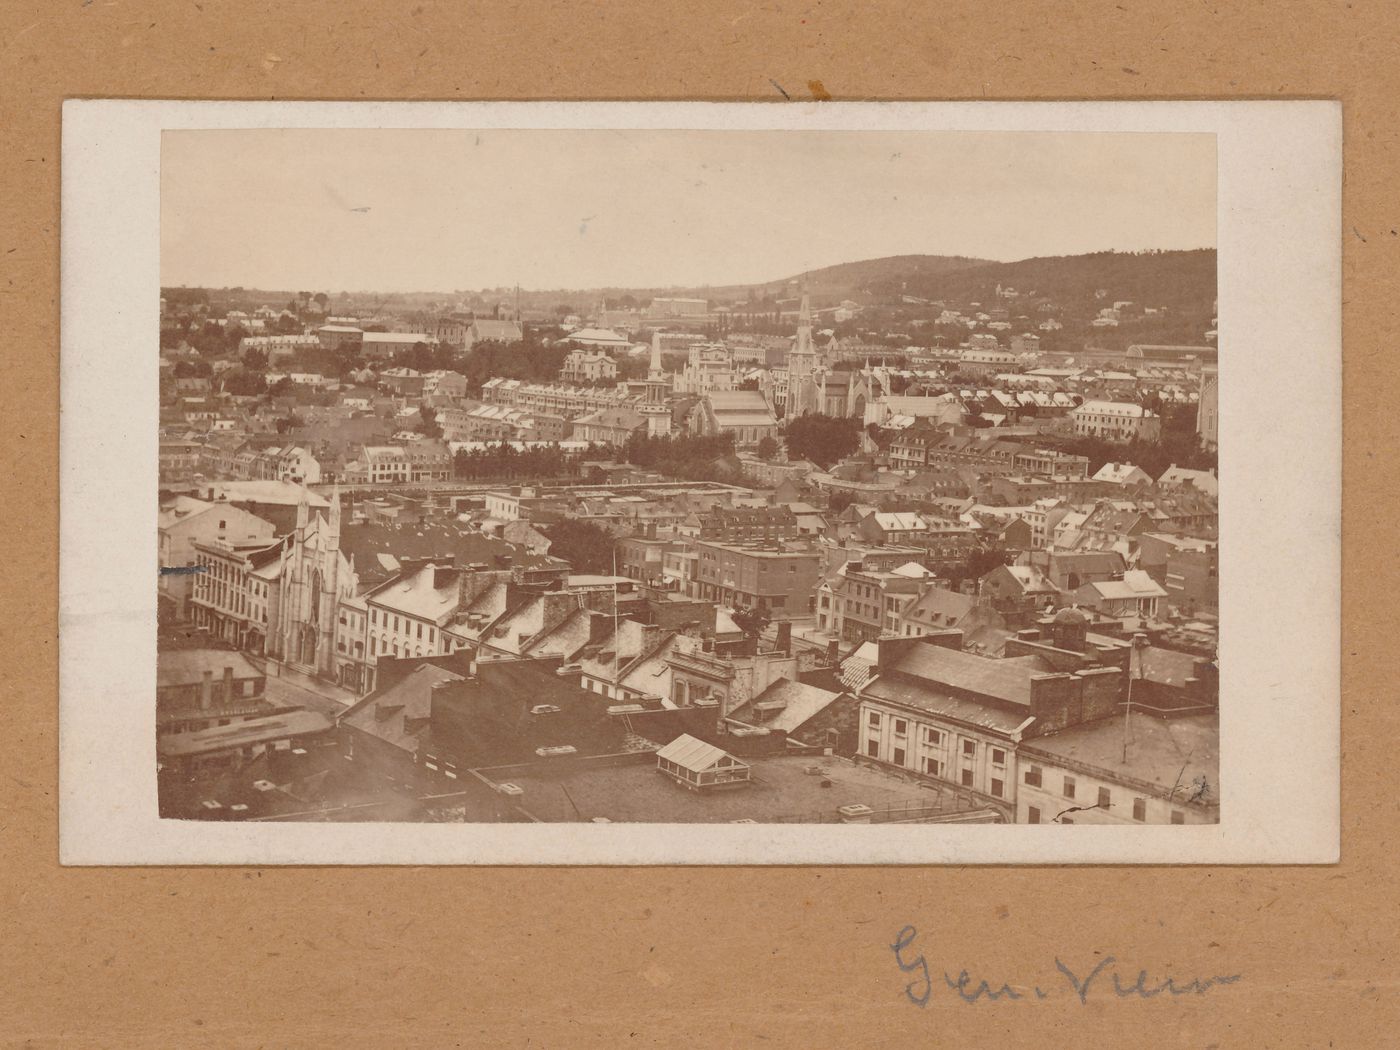 View of Montréal, possibly from a tower of Basilique Notre-Dame, with Mount Royal in the background, Canada (now Québec, Canada)